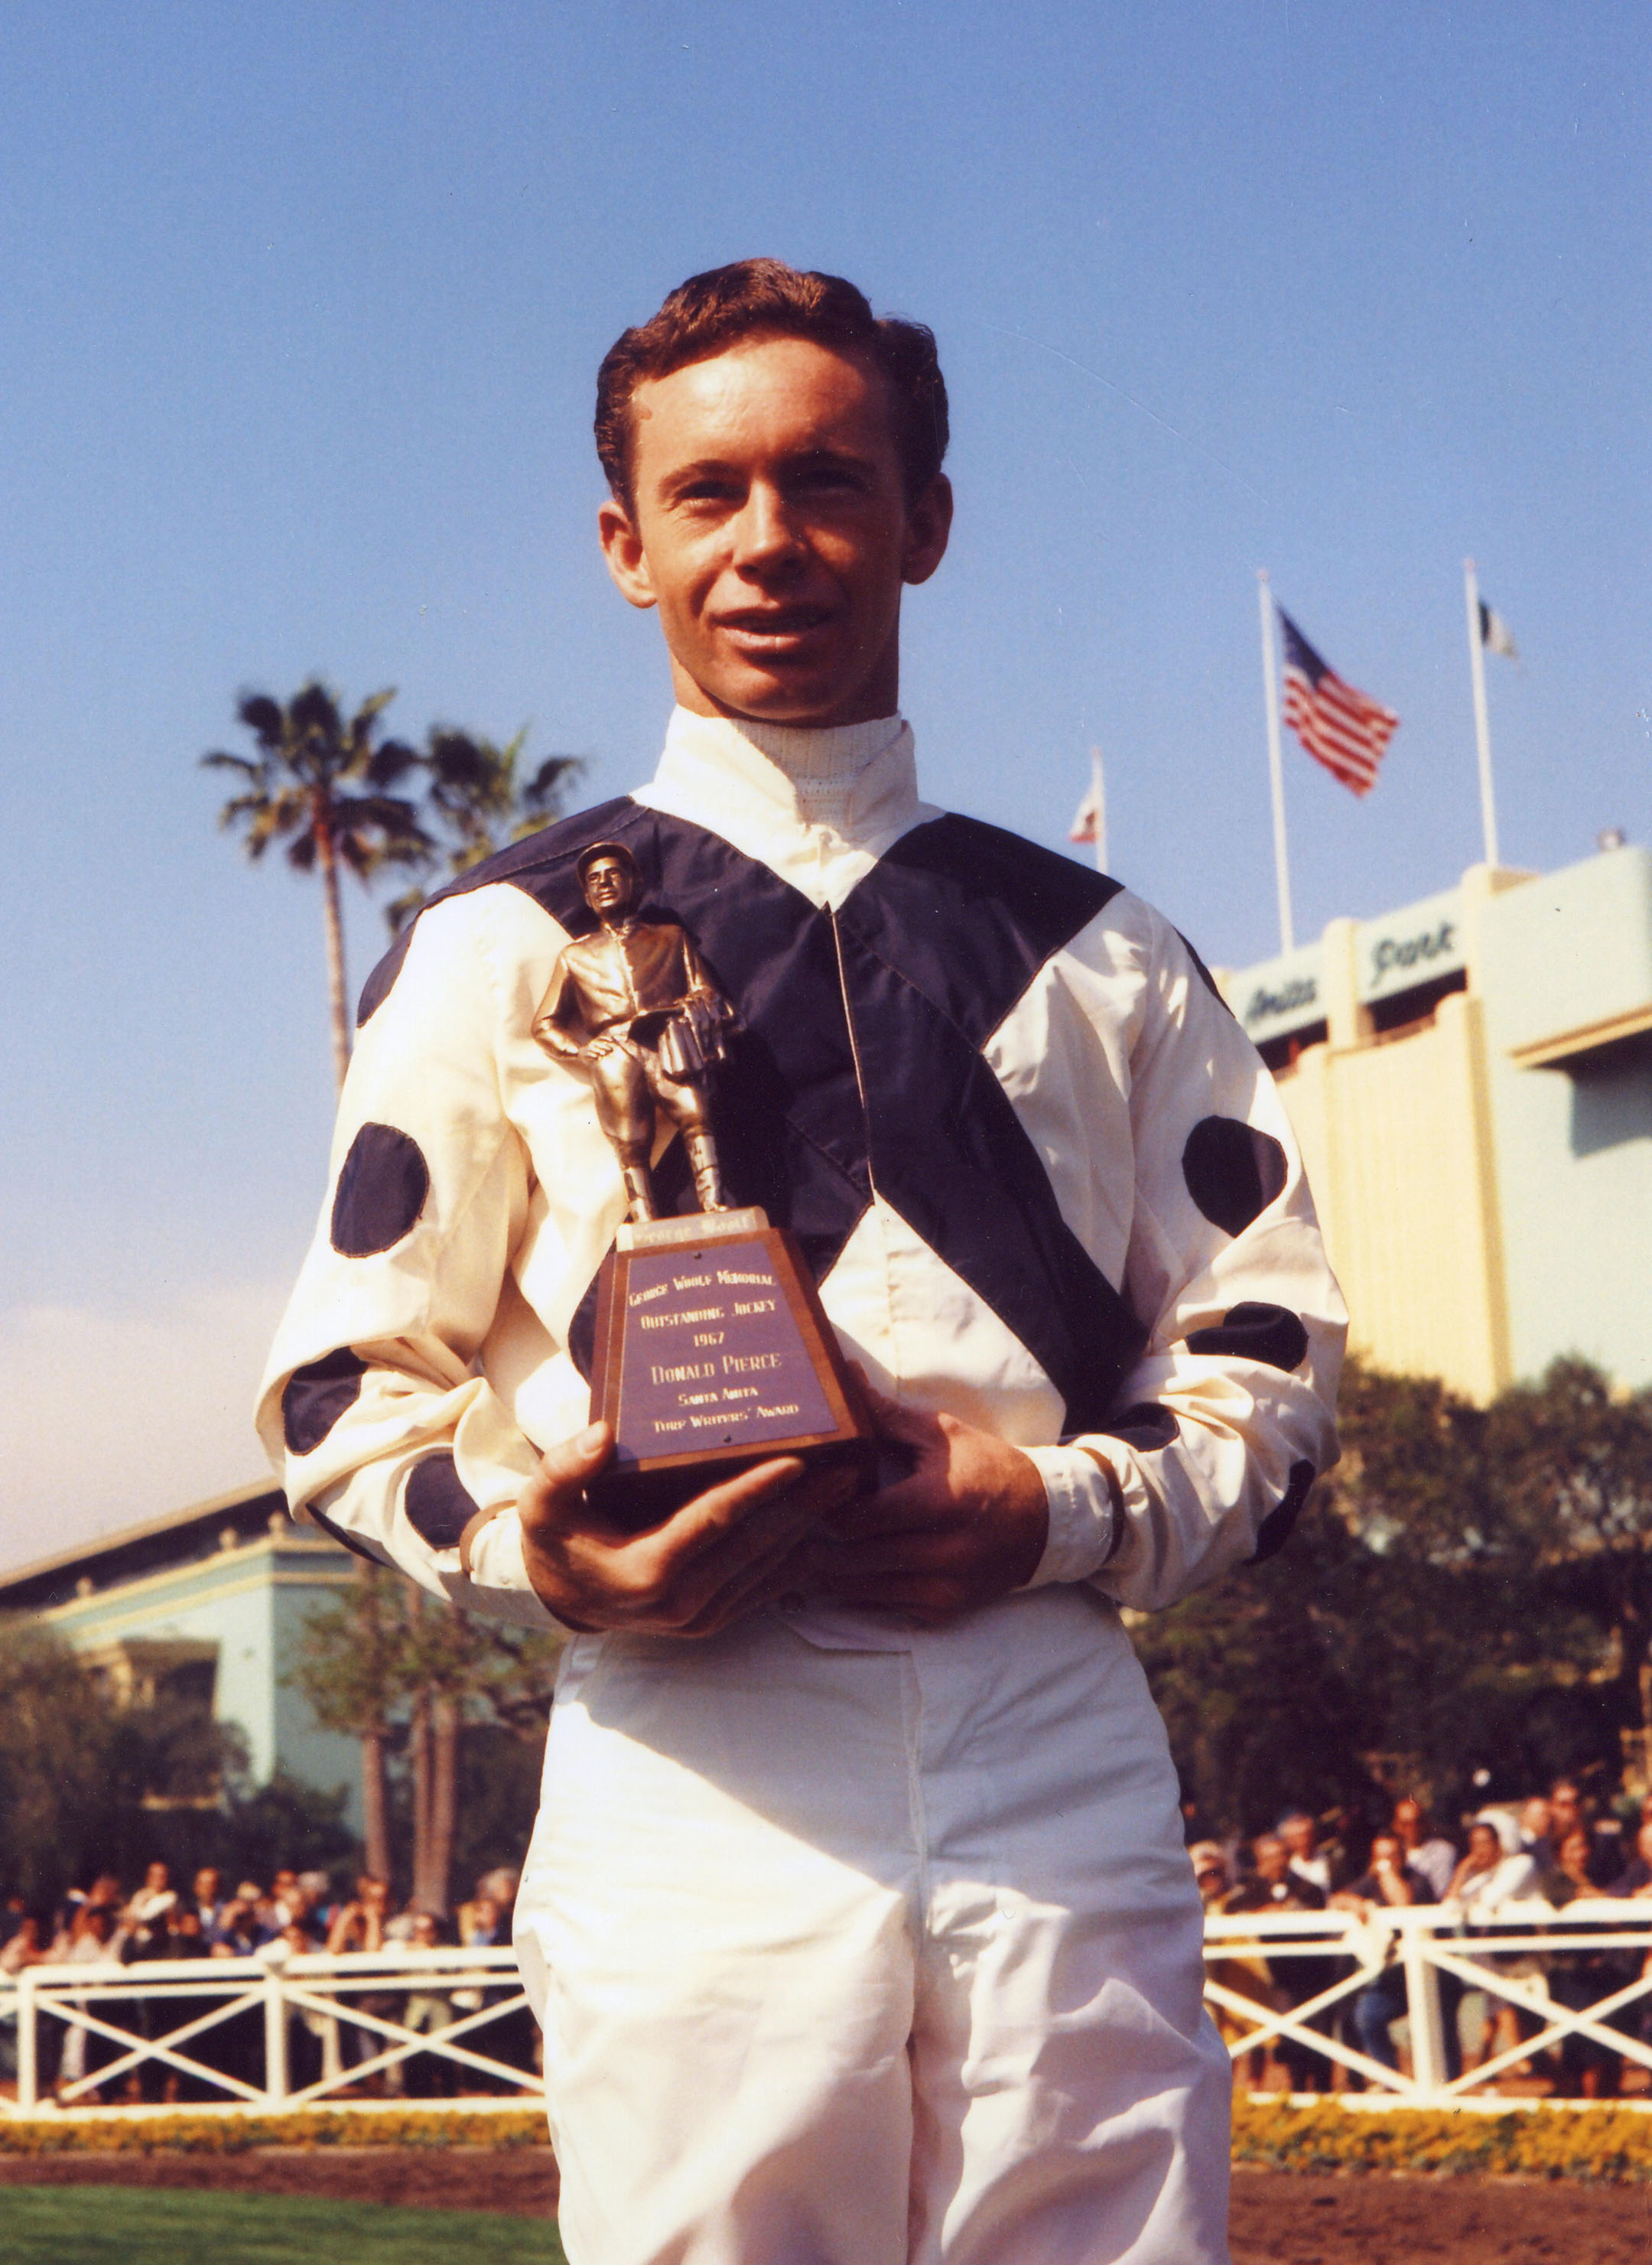 Don Pierce receives the George Woolf Memorial Award at Santa Anita, March 1967 (Bill Mochon/Museum Collection)